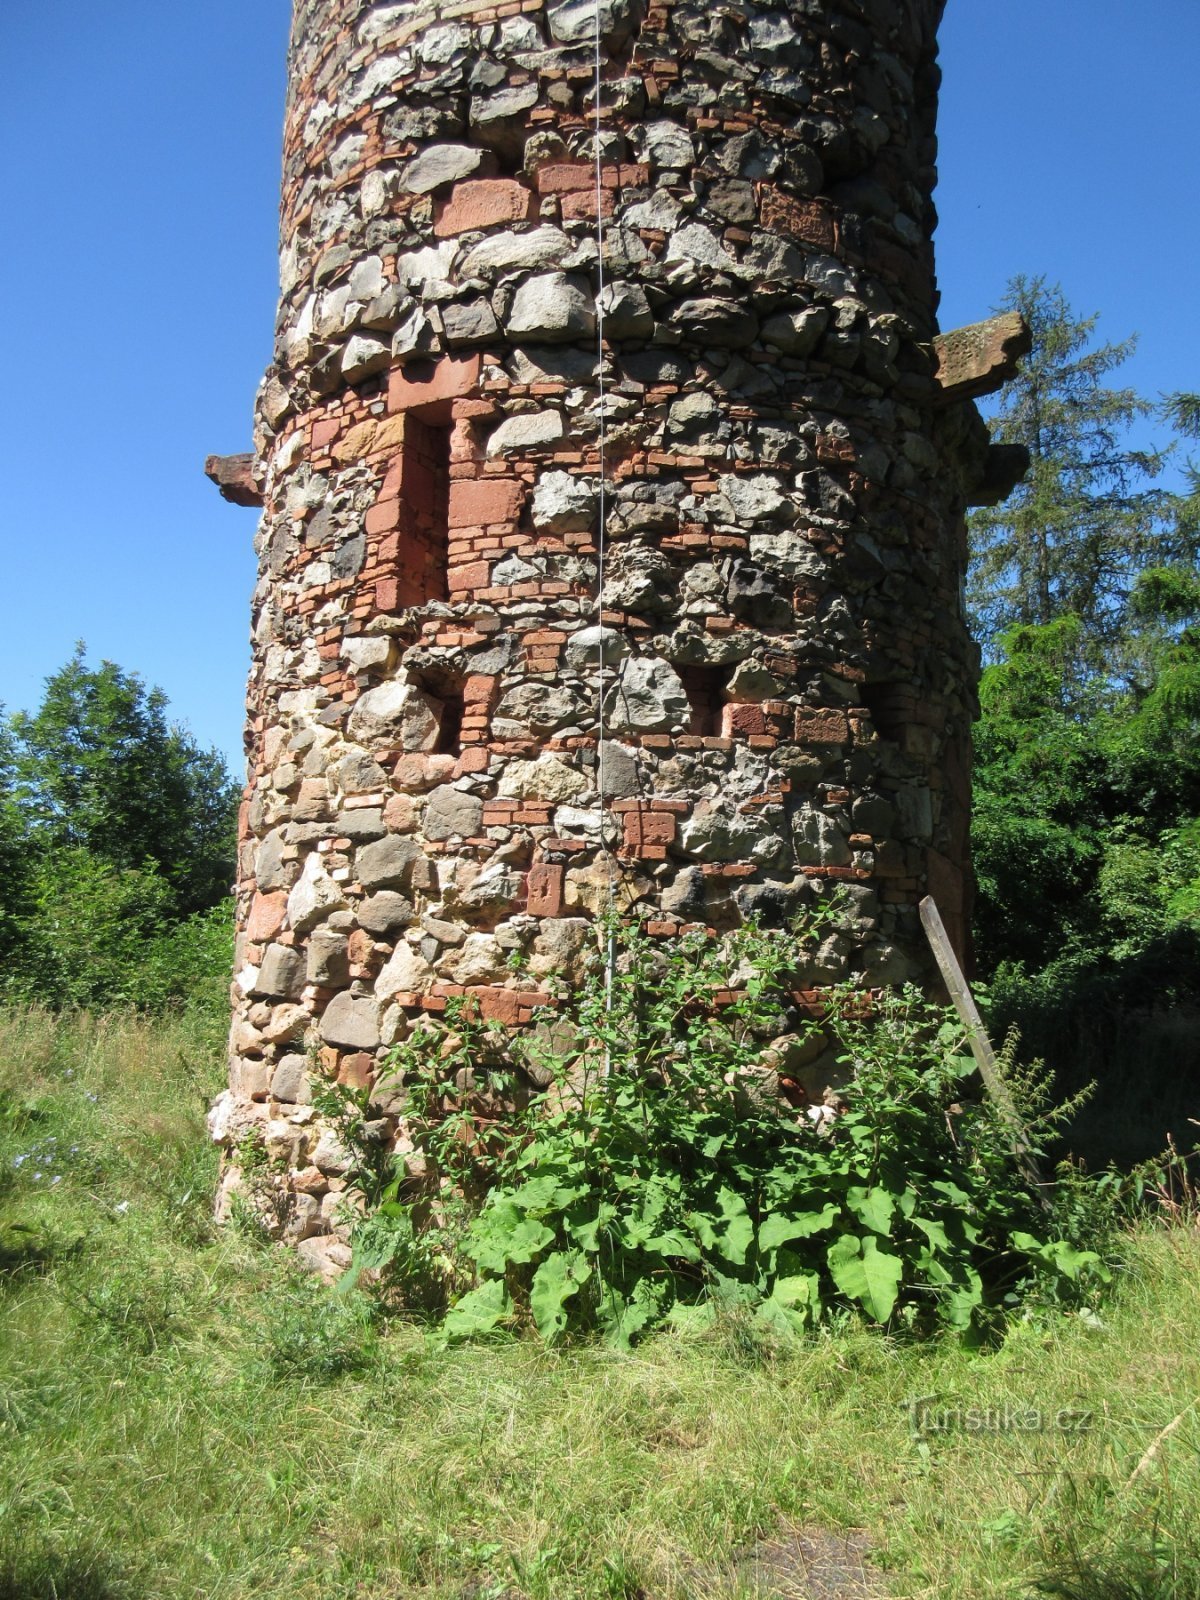 Vochlice lookout tower - lower part